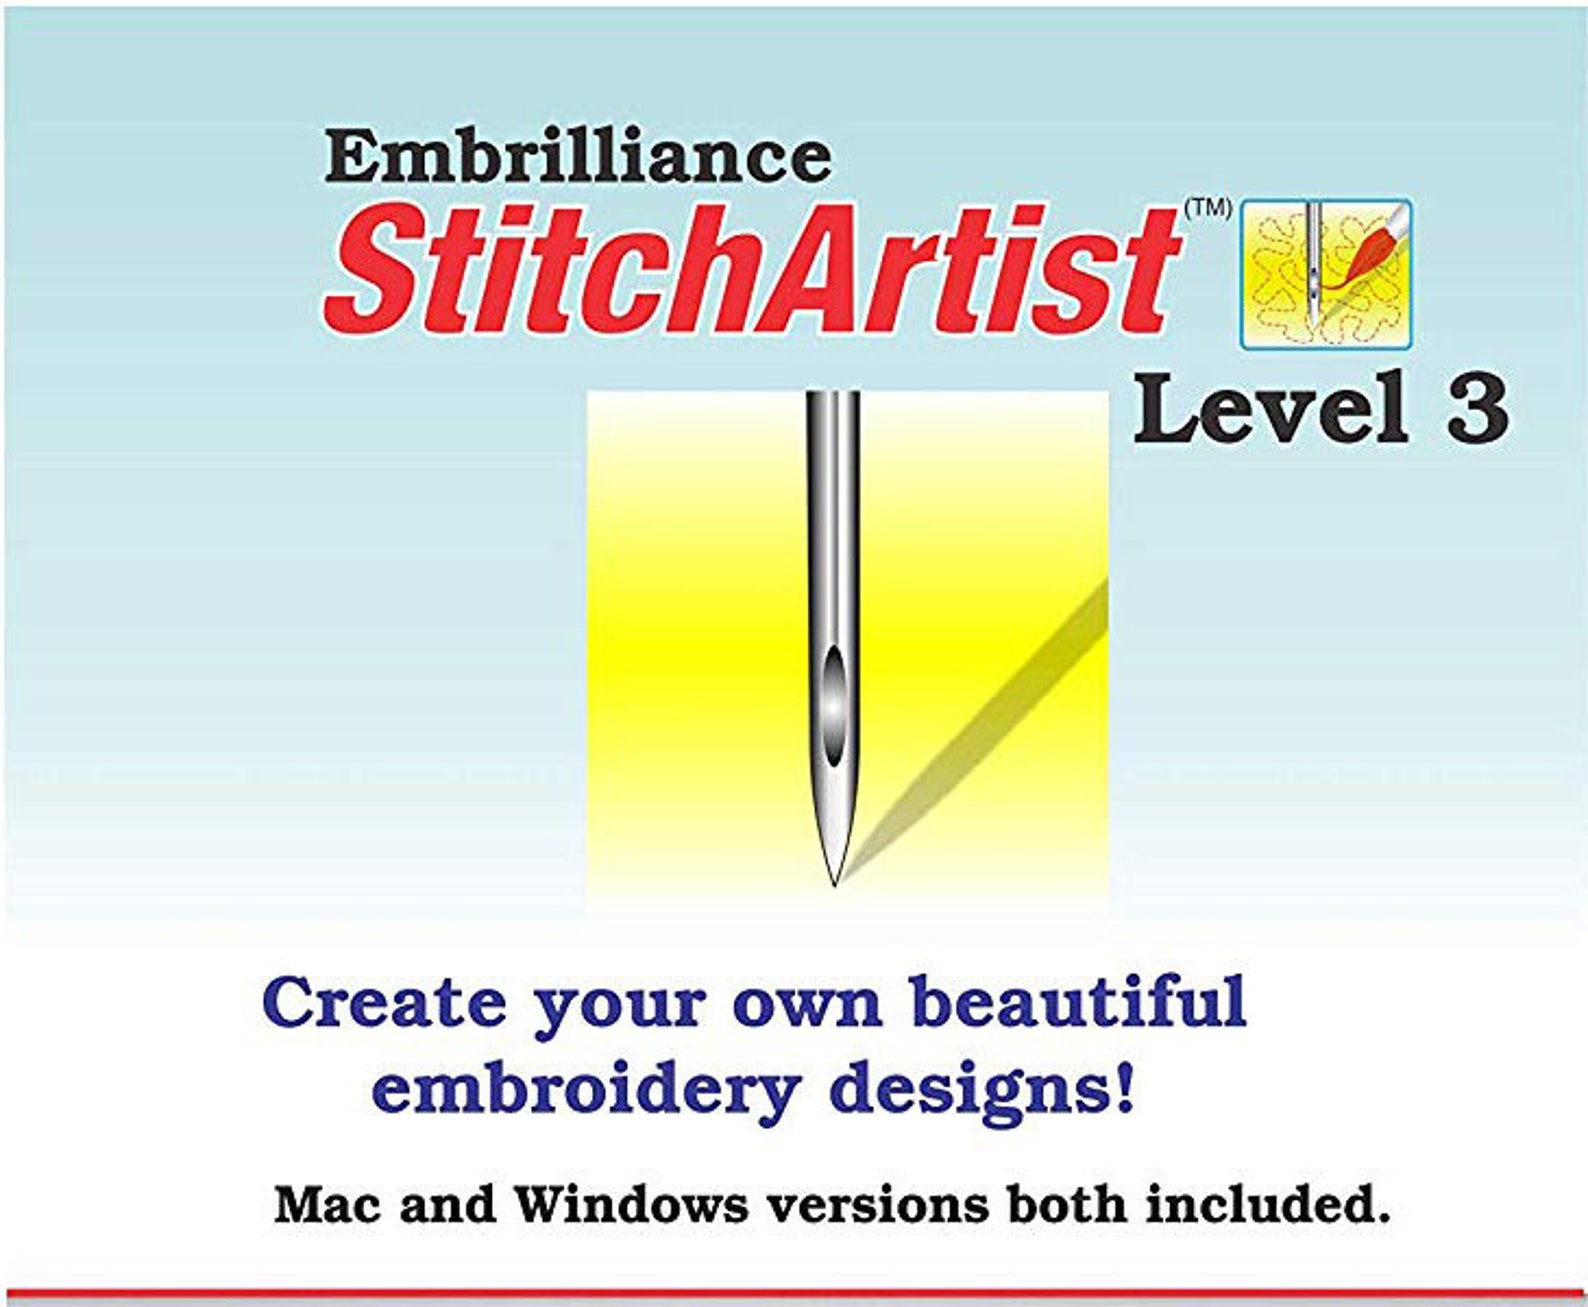 EMBRILLIANCE Stitchartist Level 3 Software Embroidery Etsy